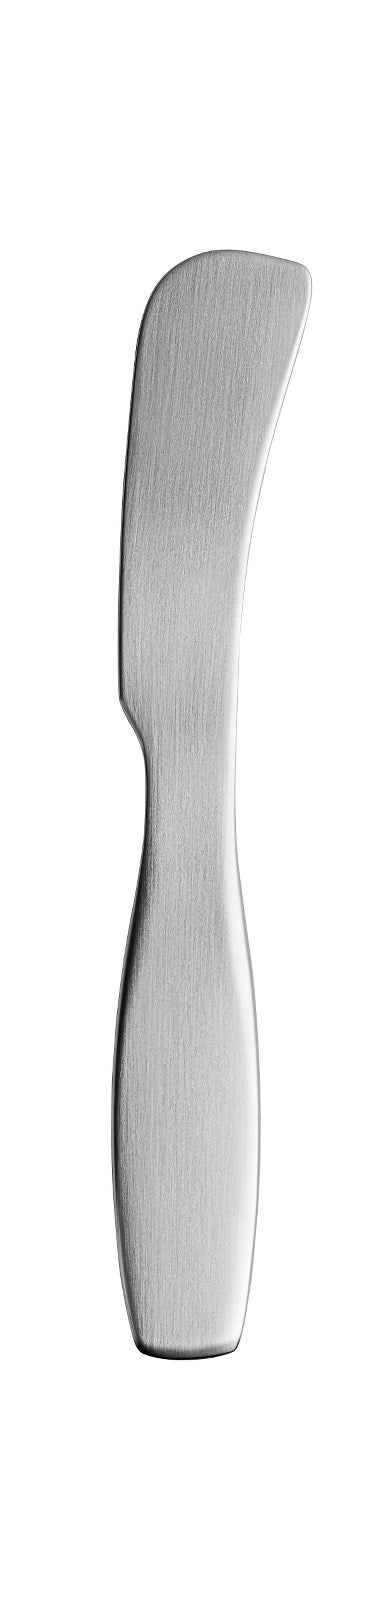 product image for Collective Tools Flatware design by Antonio Citterio for Iittala 47